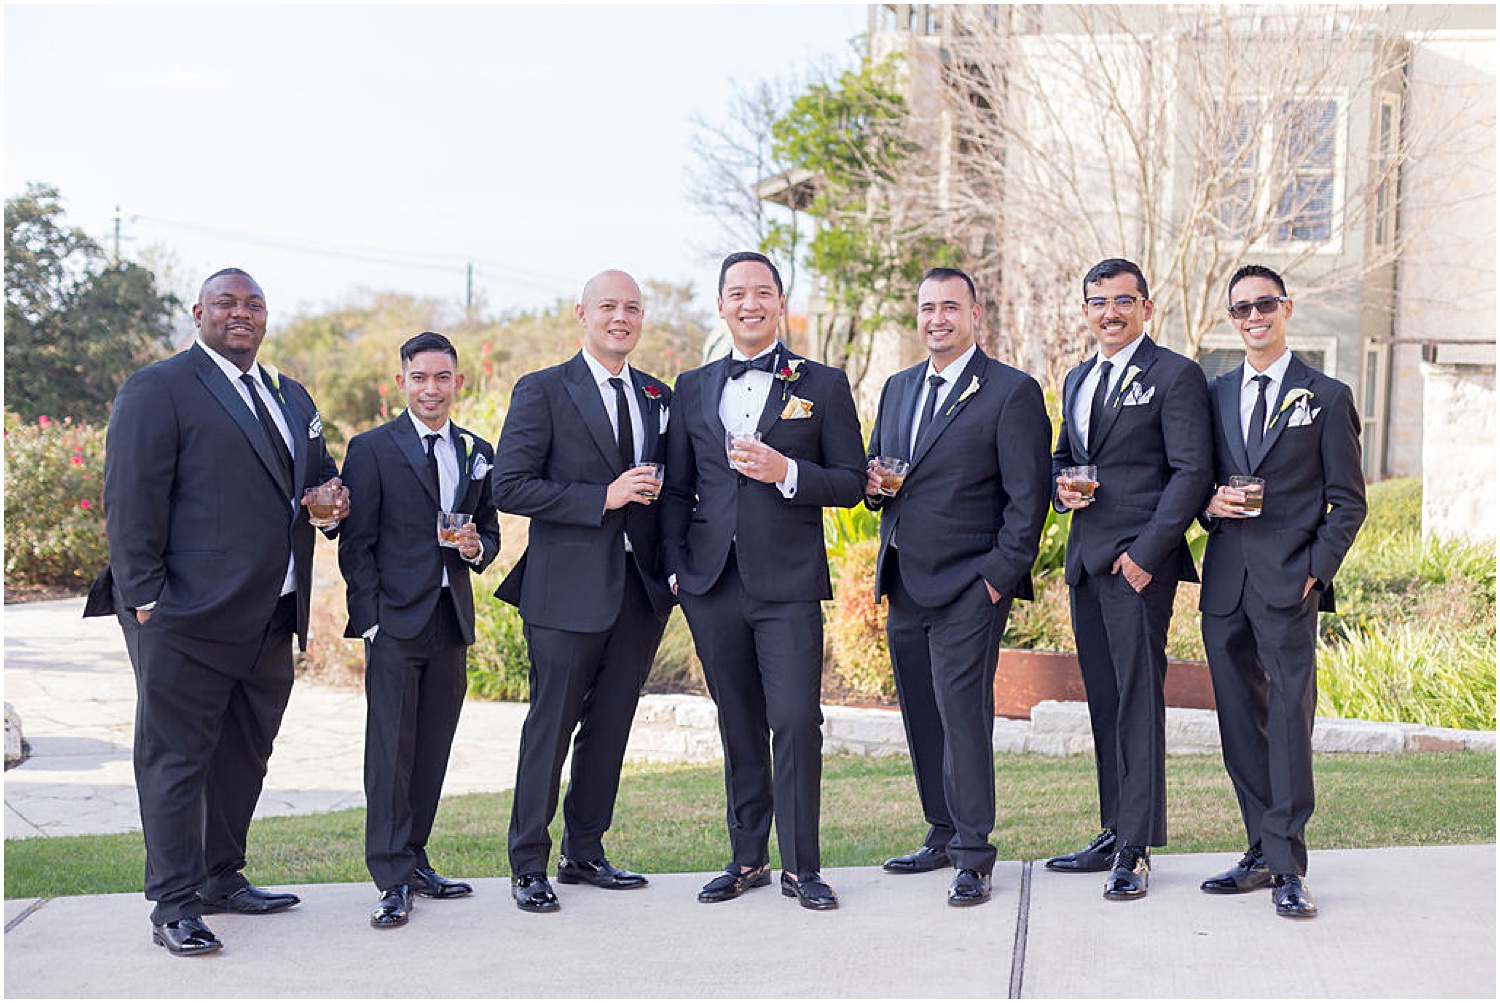 Bridal party with groomsmen captured in Austin, Texas with Monica Roberts Photography based in Richmond Virginia monicaroberts.com